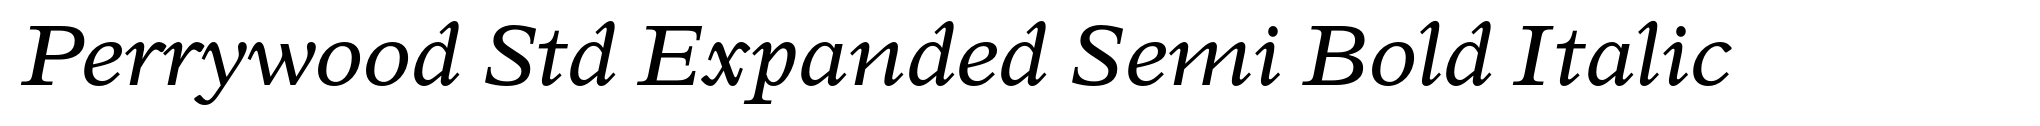 Perrywood Std Expanded Semi Bold Italic image